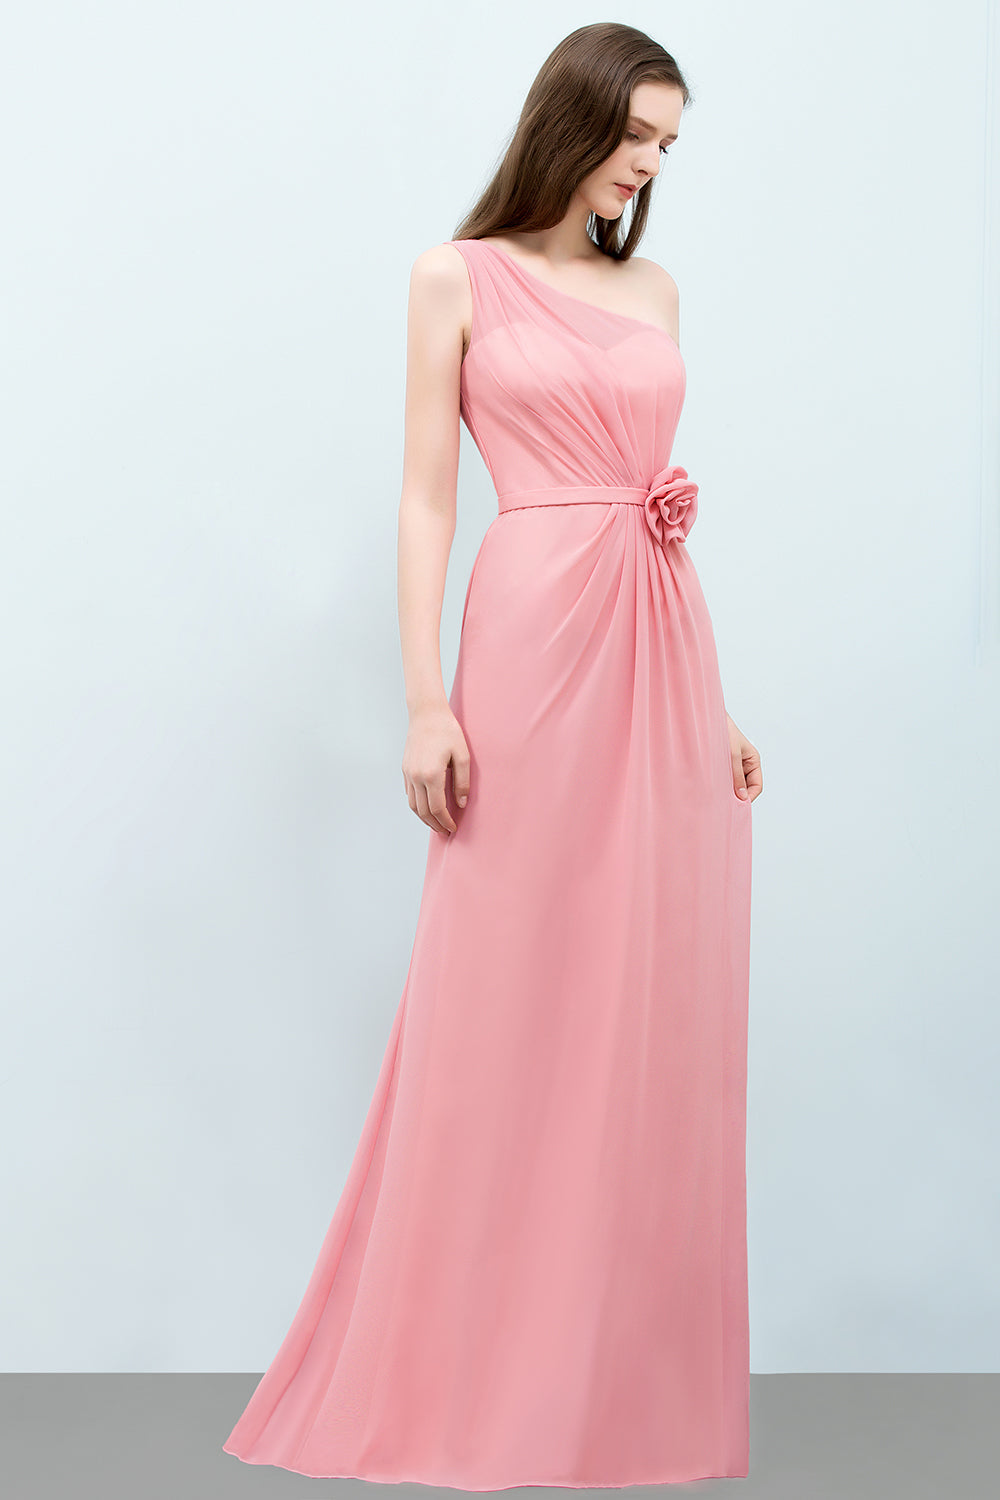 Affordable Mermaid One shoulder Pink Bridesmaid Dresses with Flowers